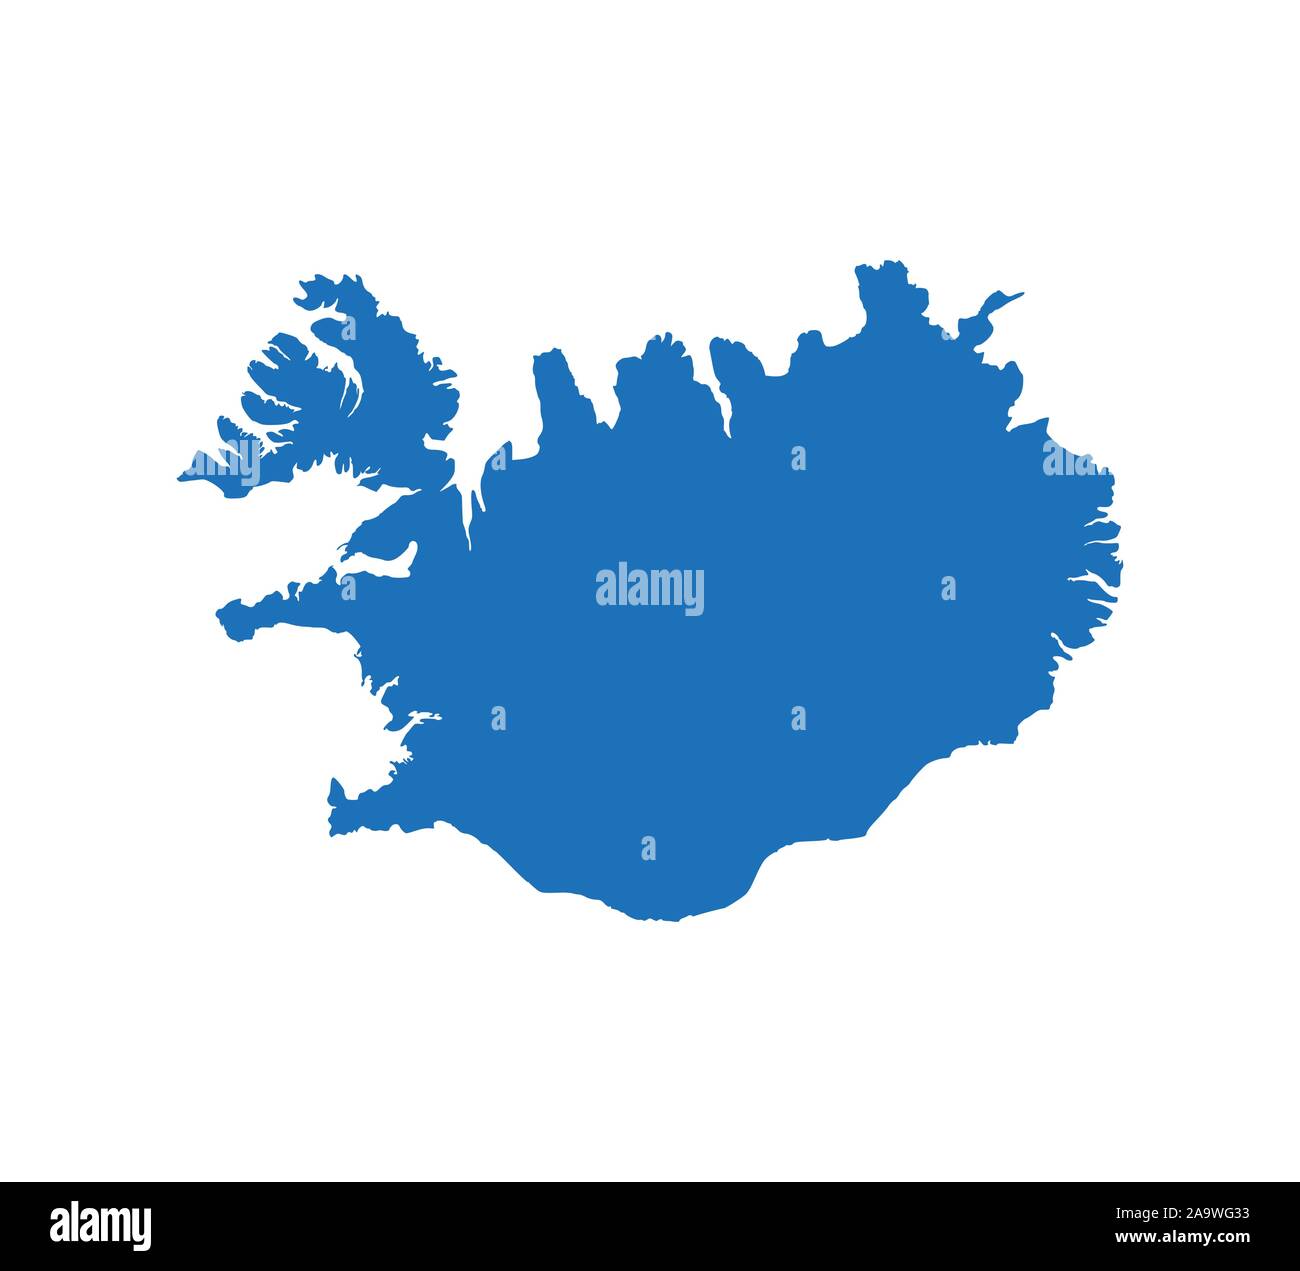 Iceland map on white background. Vector illustration. Stock Vector